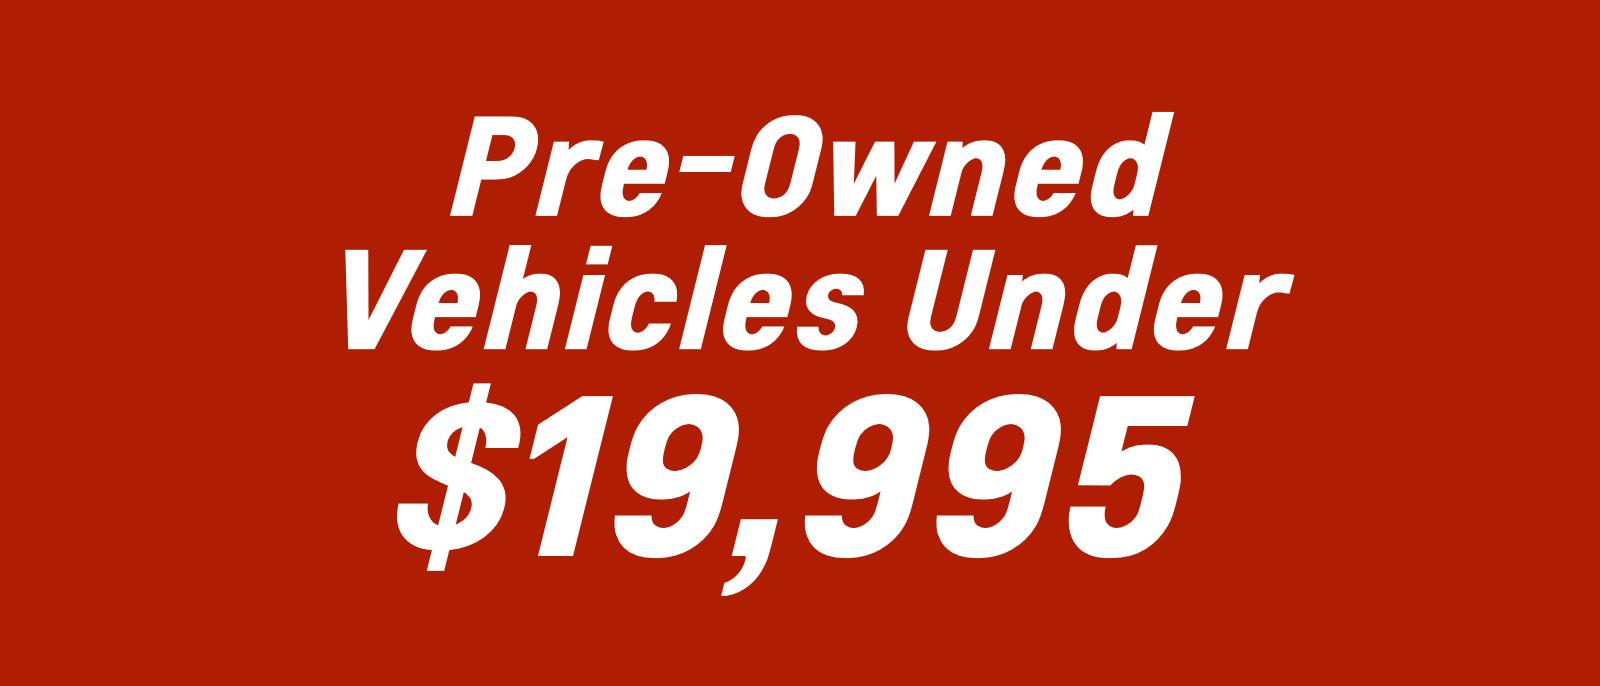 Pre-Owned Vehicles
Under $19,995